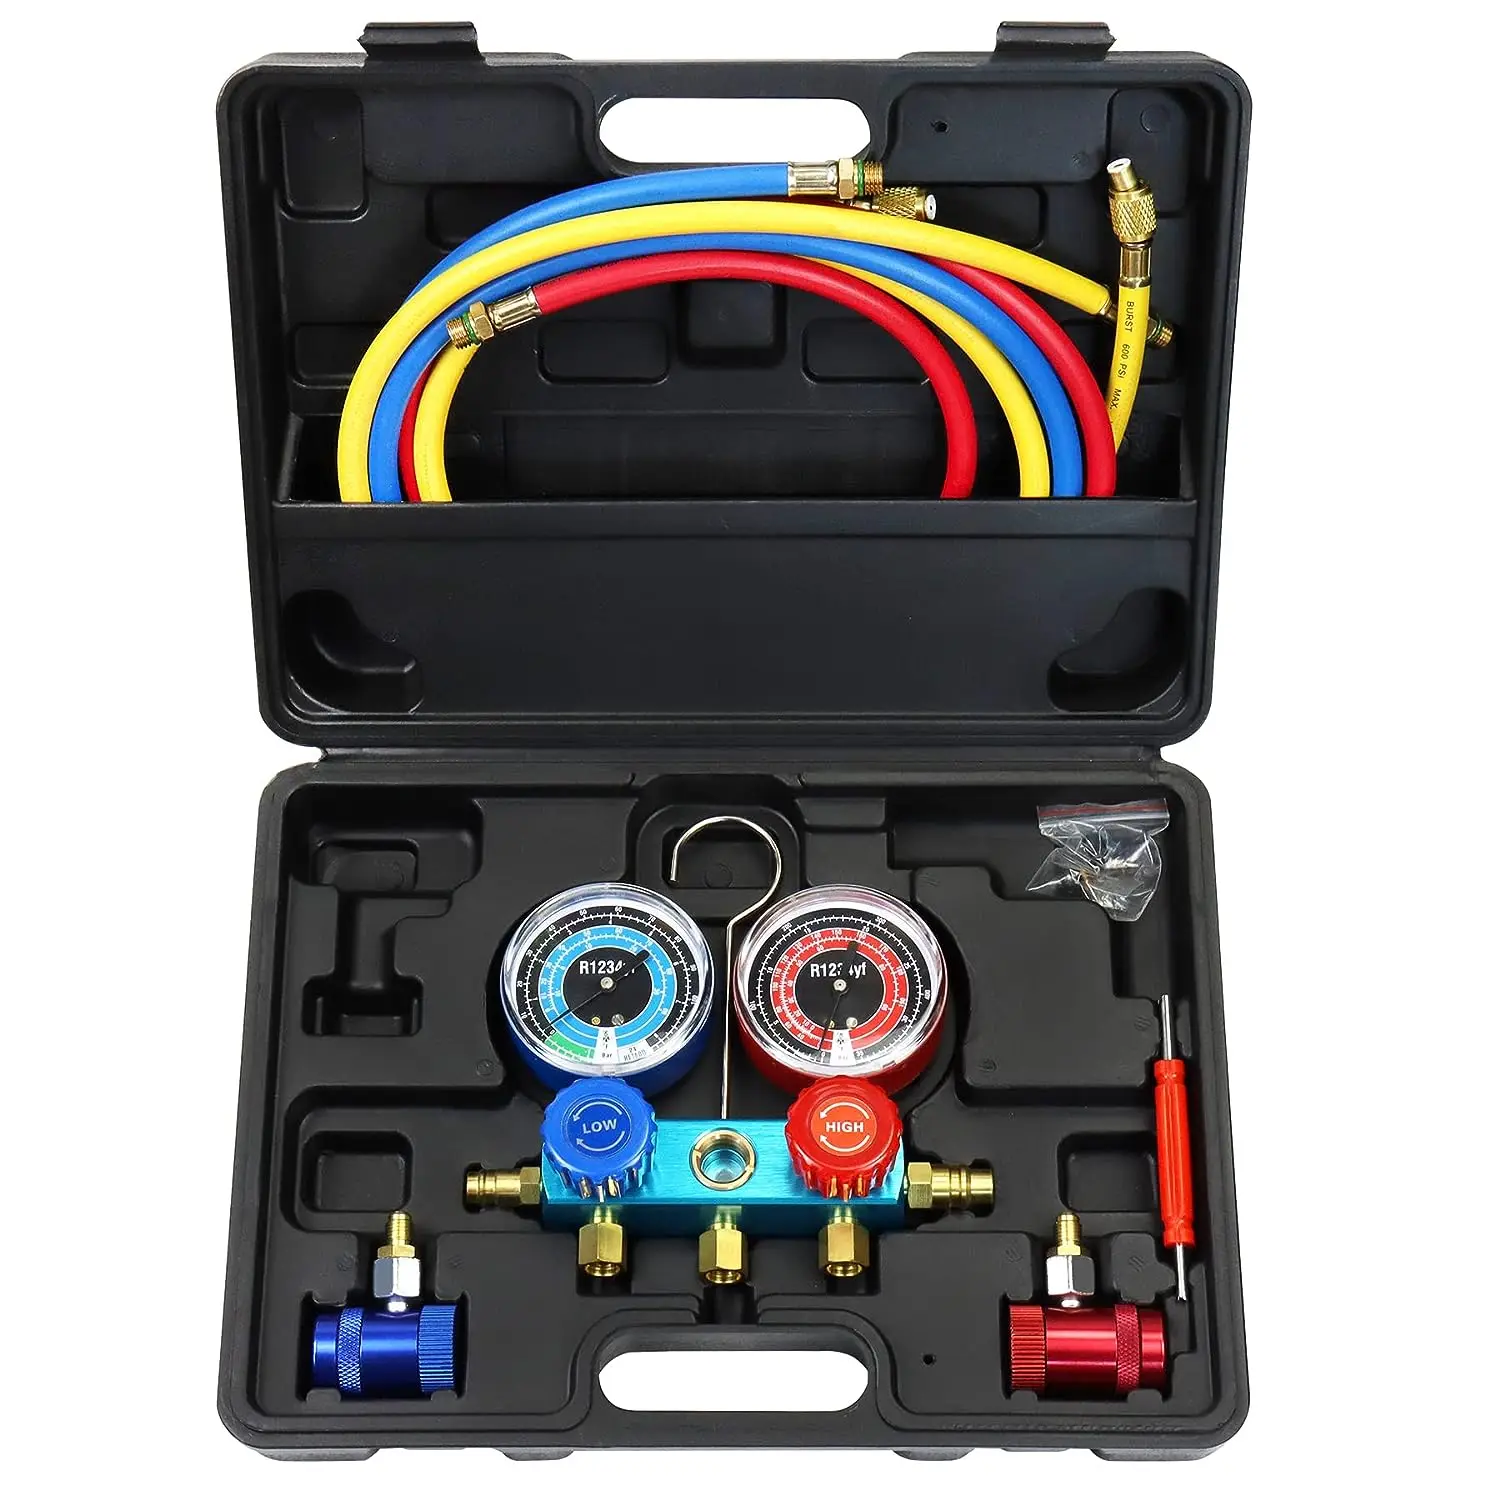 https://ae01.alicdn.com/kf/Sc5b0e32fdc0740098a6037165e90d36bs/R1234yf-Manifold-Gauge-Set-3-Way-Car-Air-Conditioning-1234yf-Refrigerant-Recharge-Tool-Kit-with-Hoses.jpg